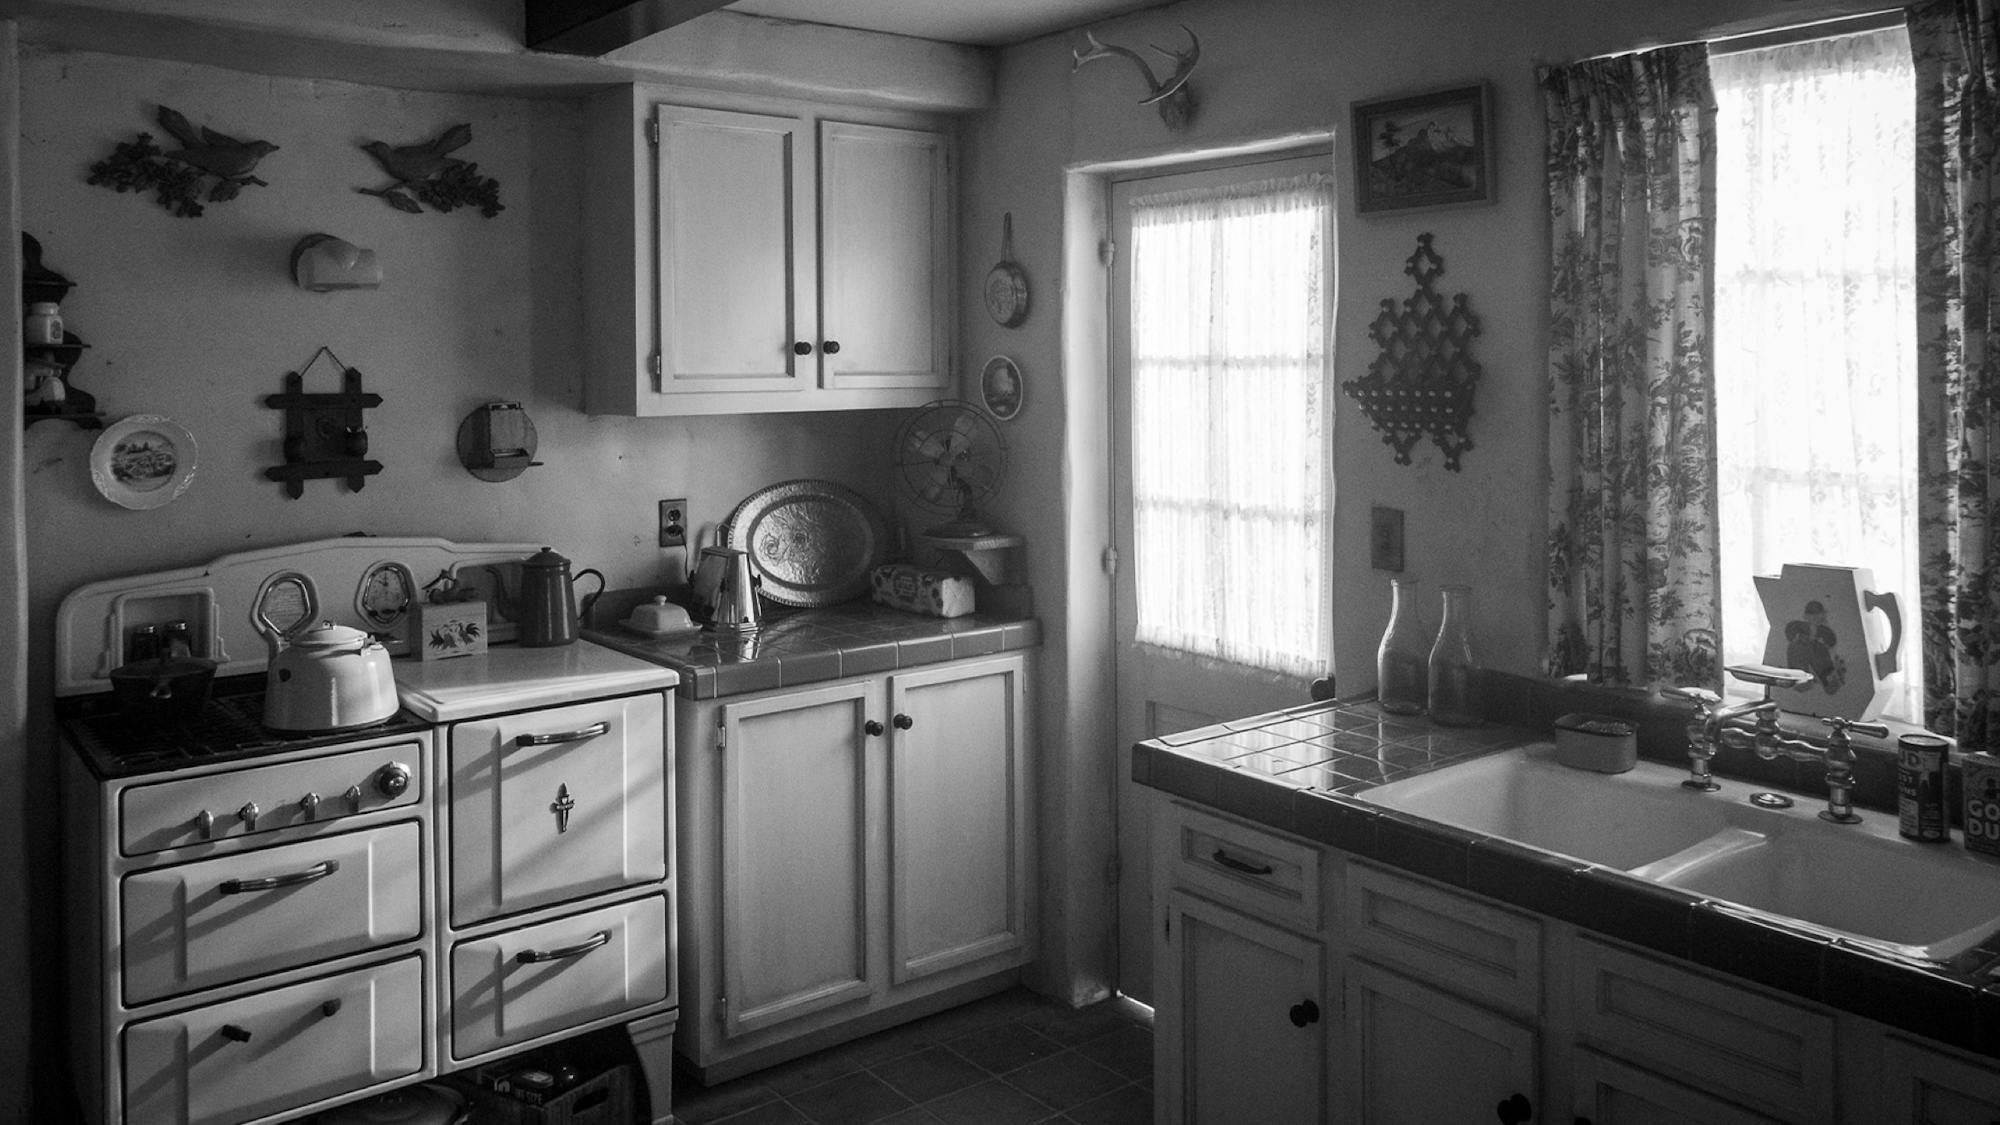 The kitchen set at the Victorville Bungalow. The room is small. The floor and counters are tiled. The walls are decorated with a quaint assortment: a small landscape painting, a decorative plate, a diminutive set of antlers. Light floods in from outside, filtered through sheer curtains. 